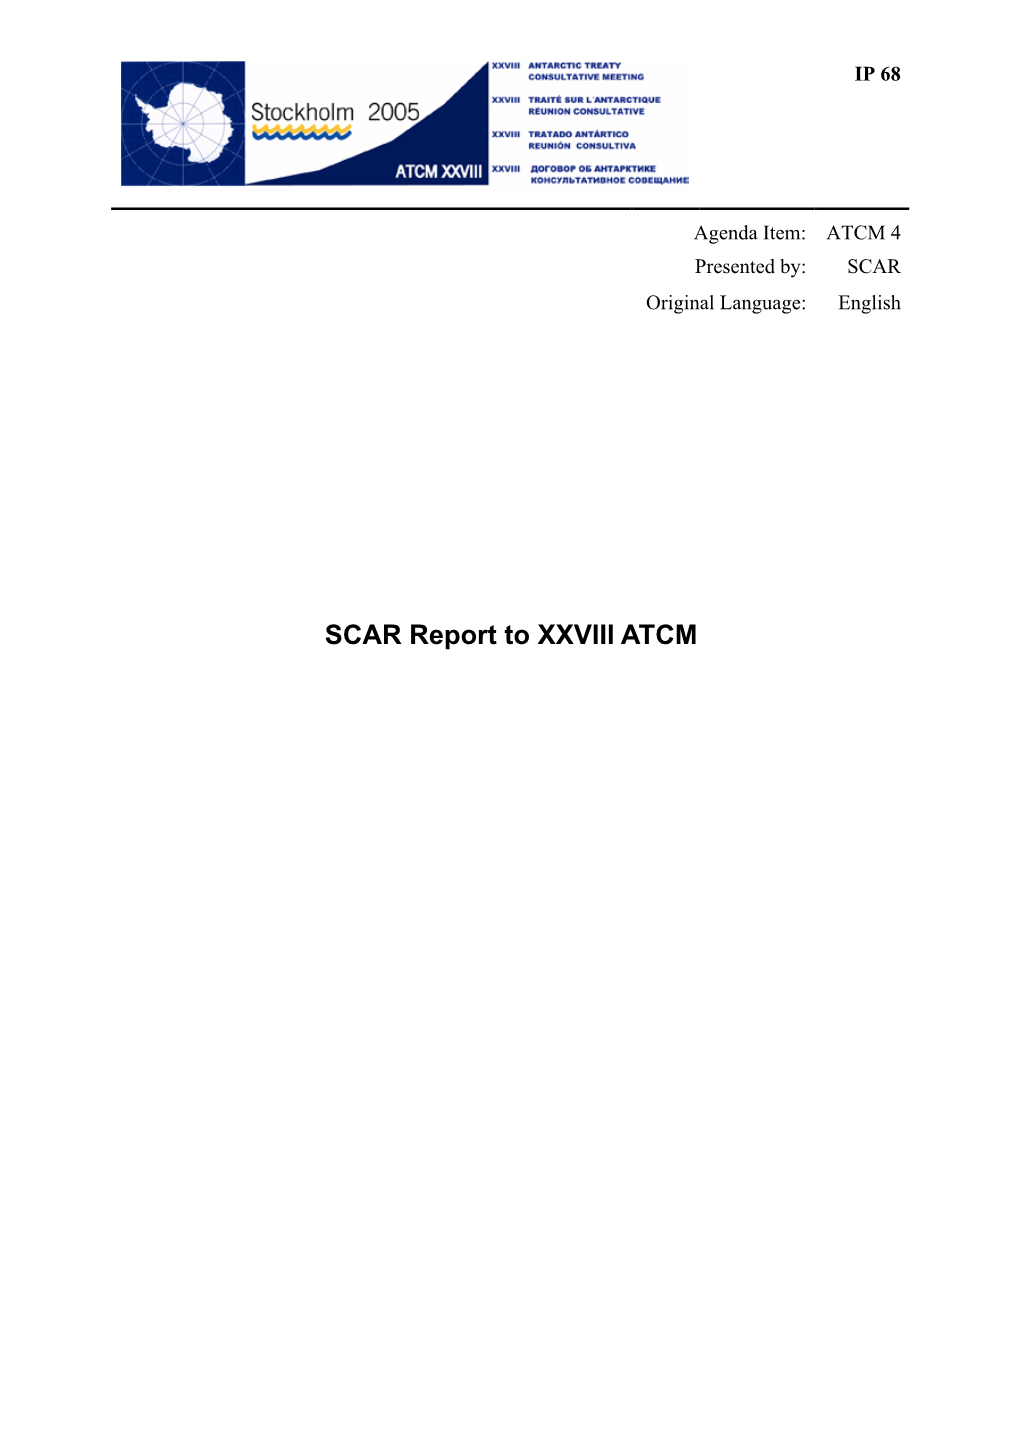 SCAR Report to XXVIII ATCM IP 68 the INTERNATIONAL COUNCIL for SCIENCE